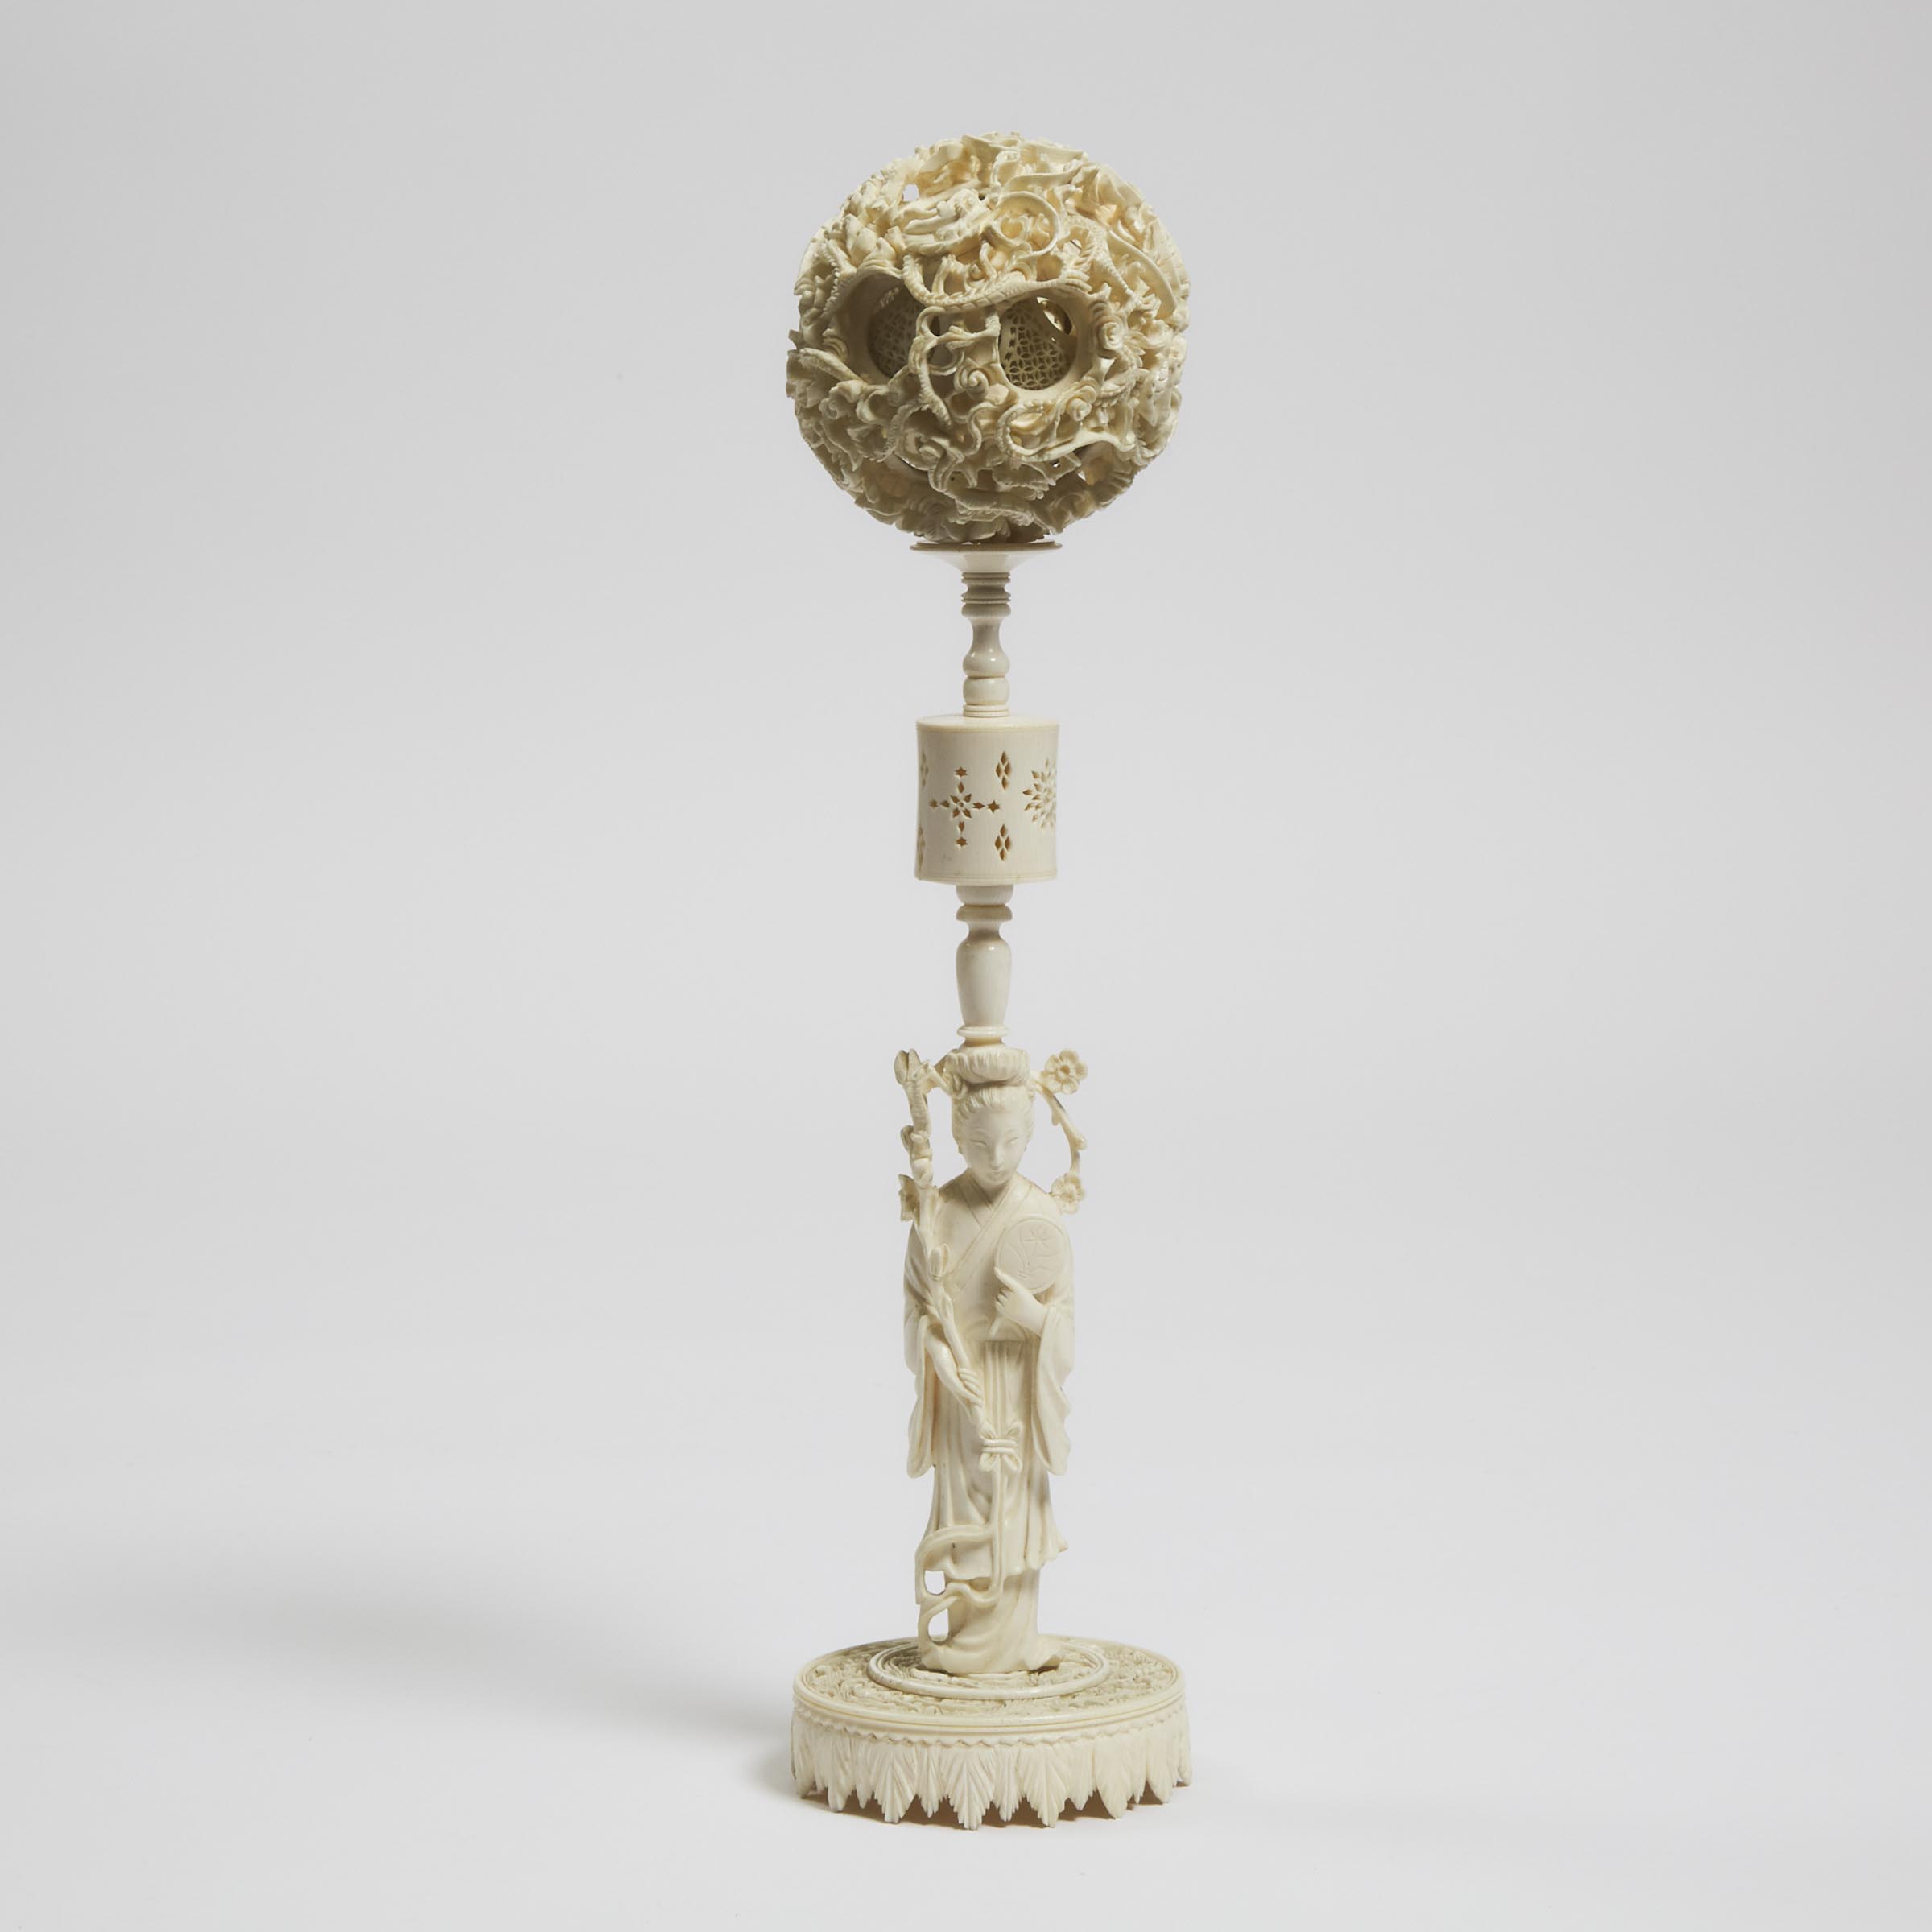 A Large Ivory Puzzle Ball and Stand, Circa 1900